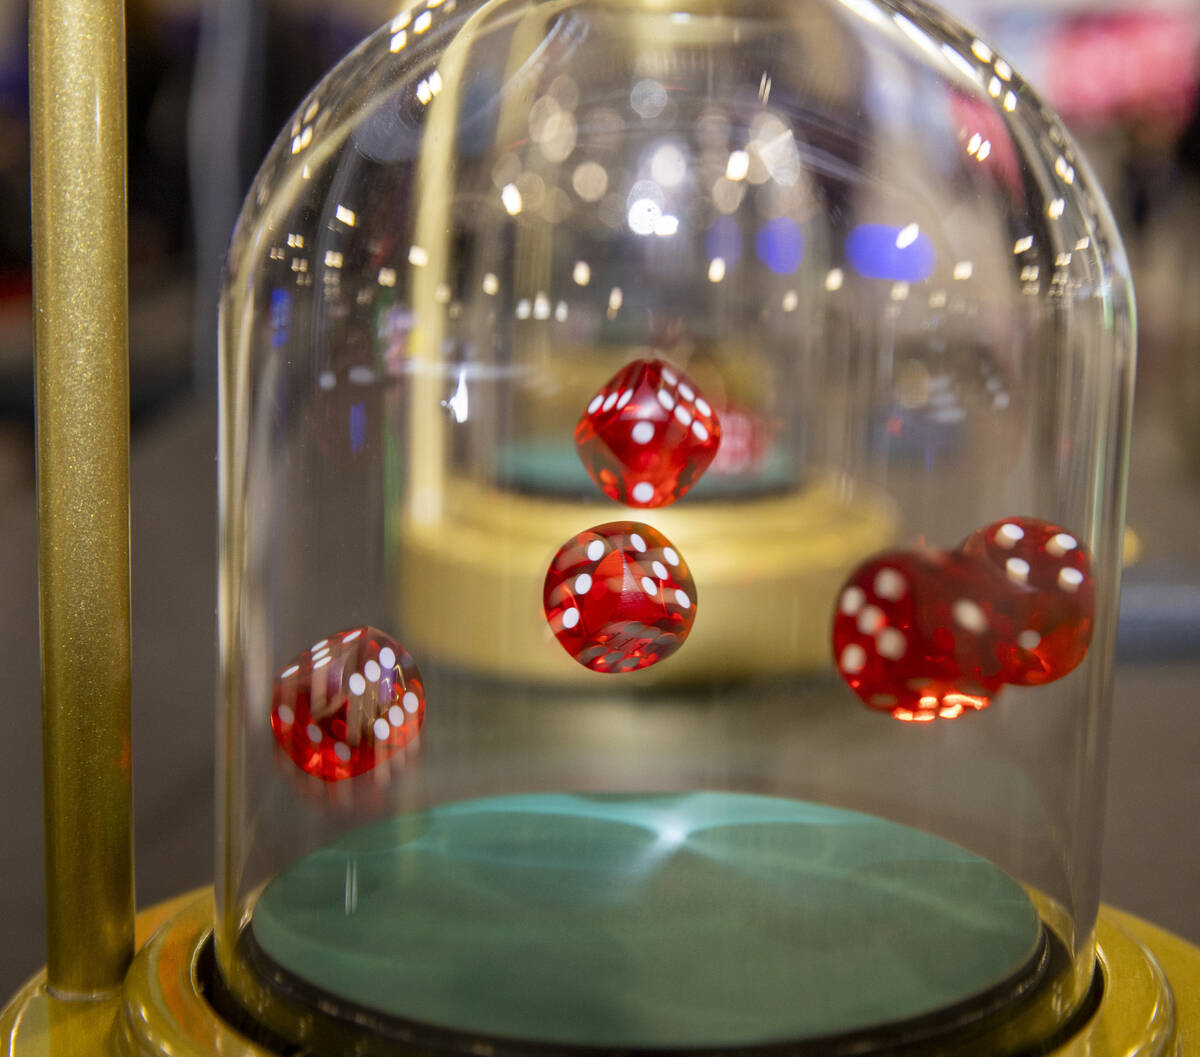 Dice pop up and are viewed on a live feed for online gamers at the tangiamo display area during ...